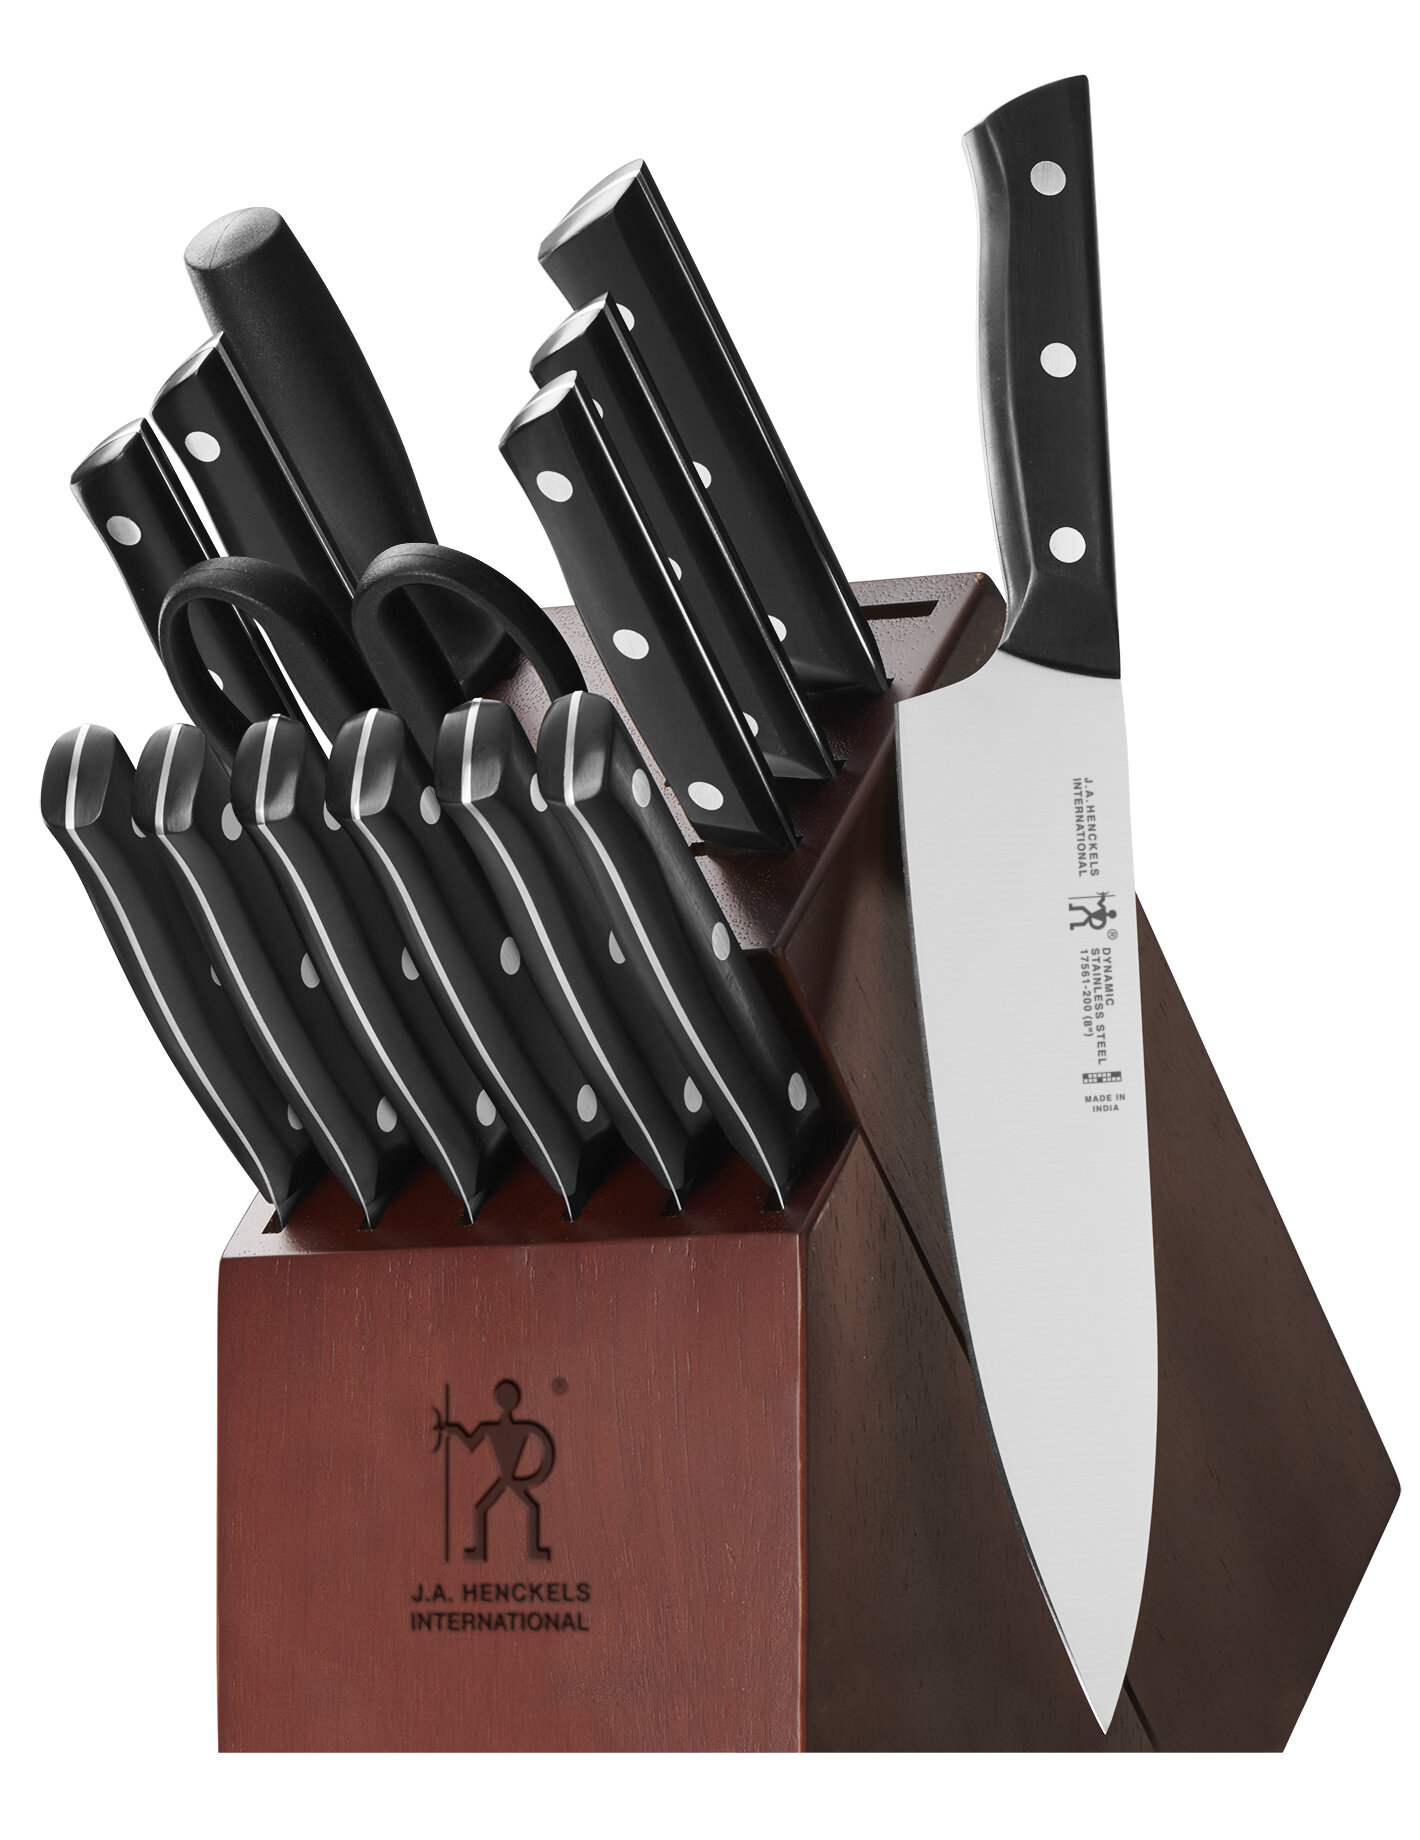 Farberware Classic Stainless Steel 6 Piece Full Tang Tripe-Riveted Knife  Prep Set with Black Handles 